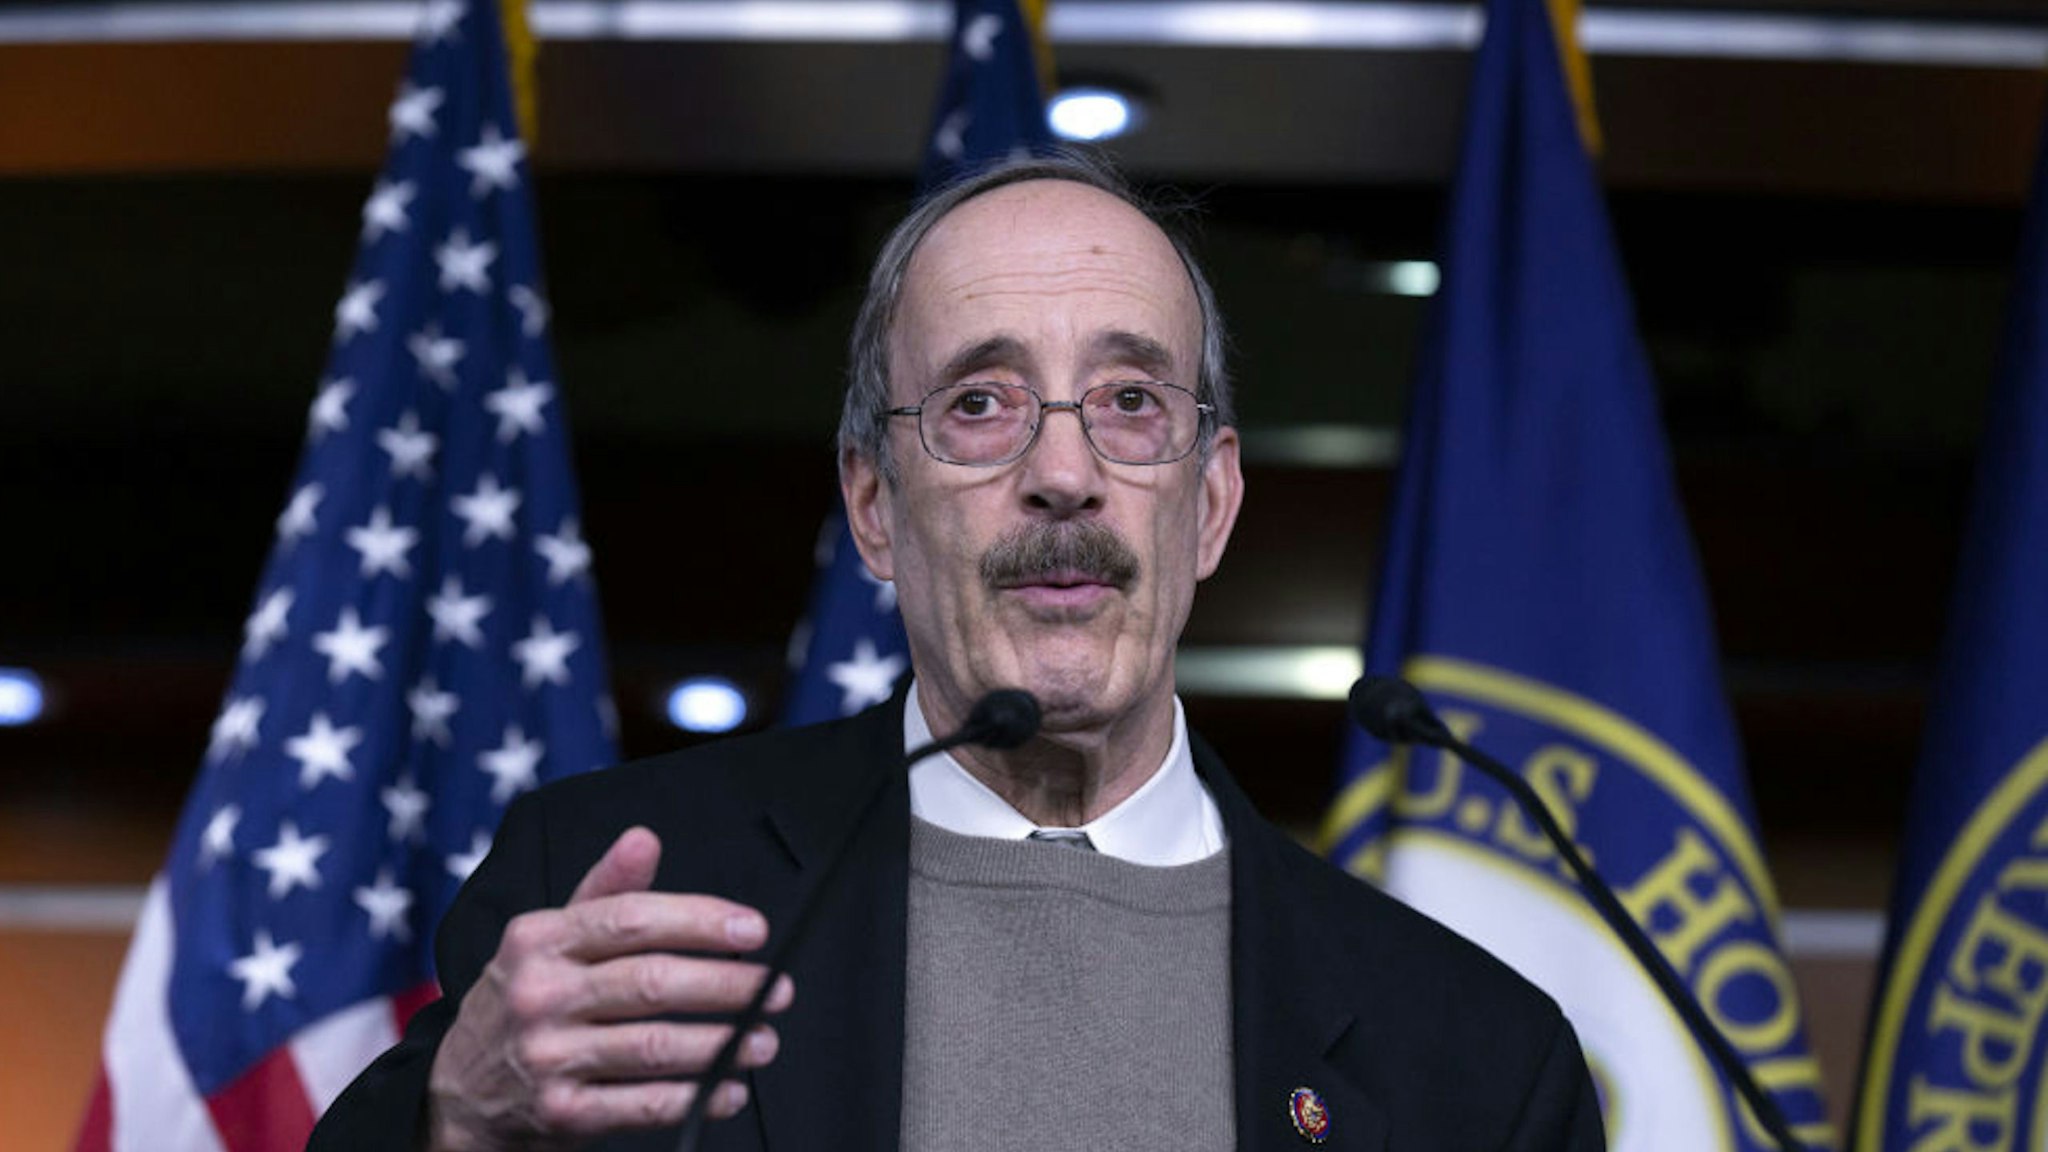 Representative Eliot Engel, a Democrat from New York, speaks during a news conference at the U.S. Capitol in Washington D.C., U.S., on Tuesday, Jan. 28, 2020. President Donald Trump's lawyers finished presenting his defense on Tuesday, their third day of arguments in the Senate impeachment trial. The next phase, 16 total hours of senators' questions for both sides, will begin Wednesday.